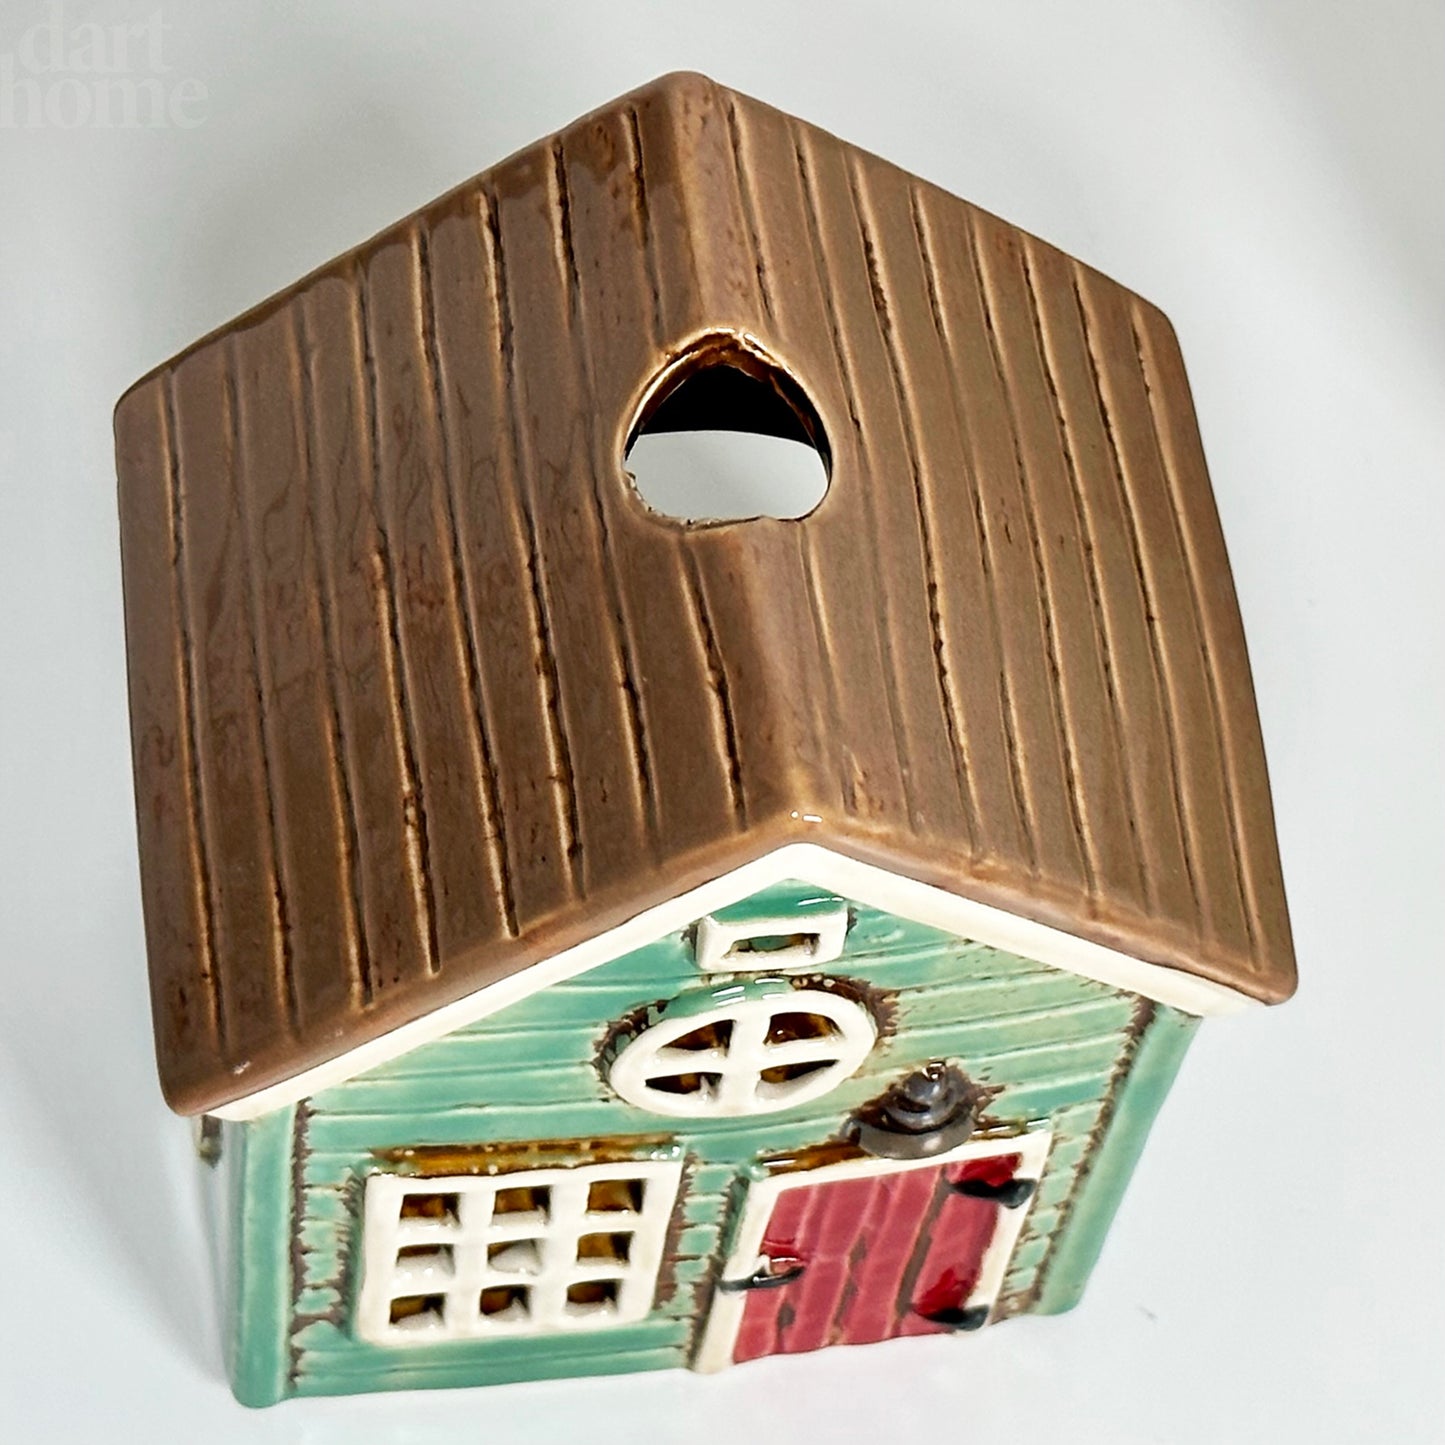 Green Holiday House Candle Holder